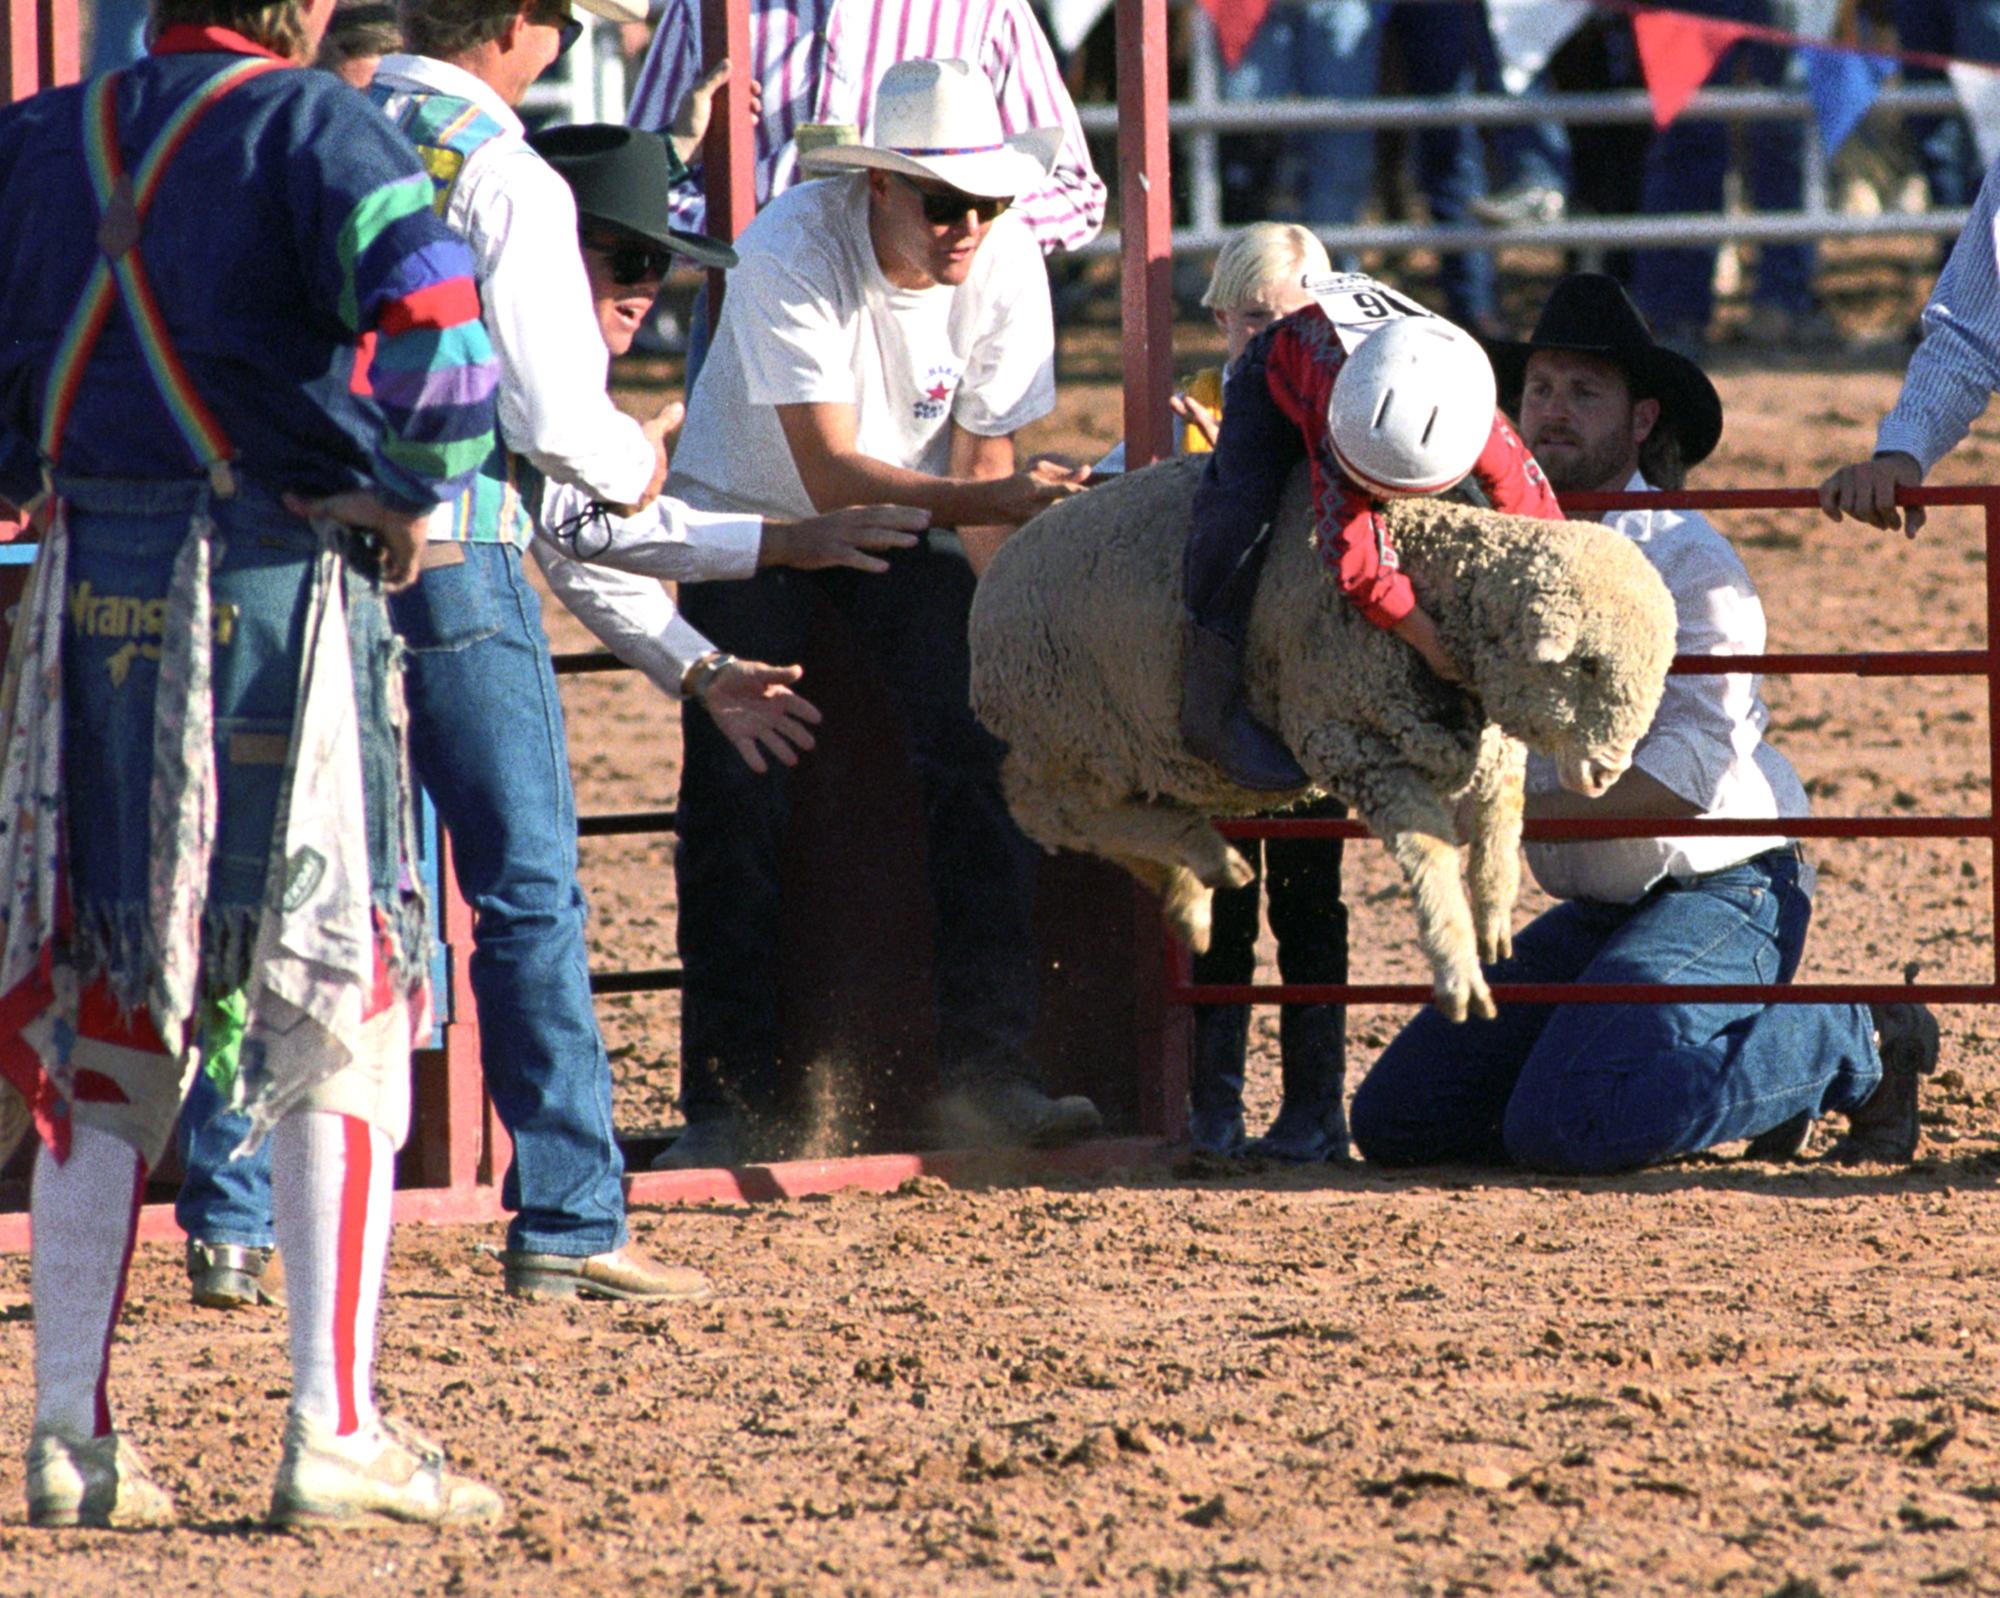 Imperial Valley Rodeo (1992) - Sheep Riding #3